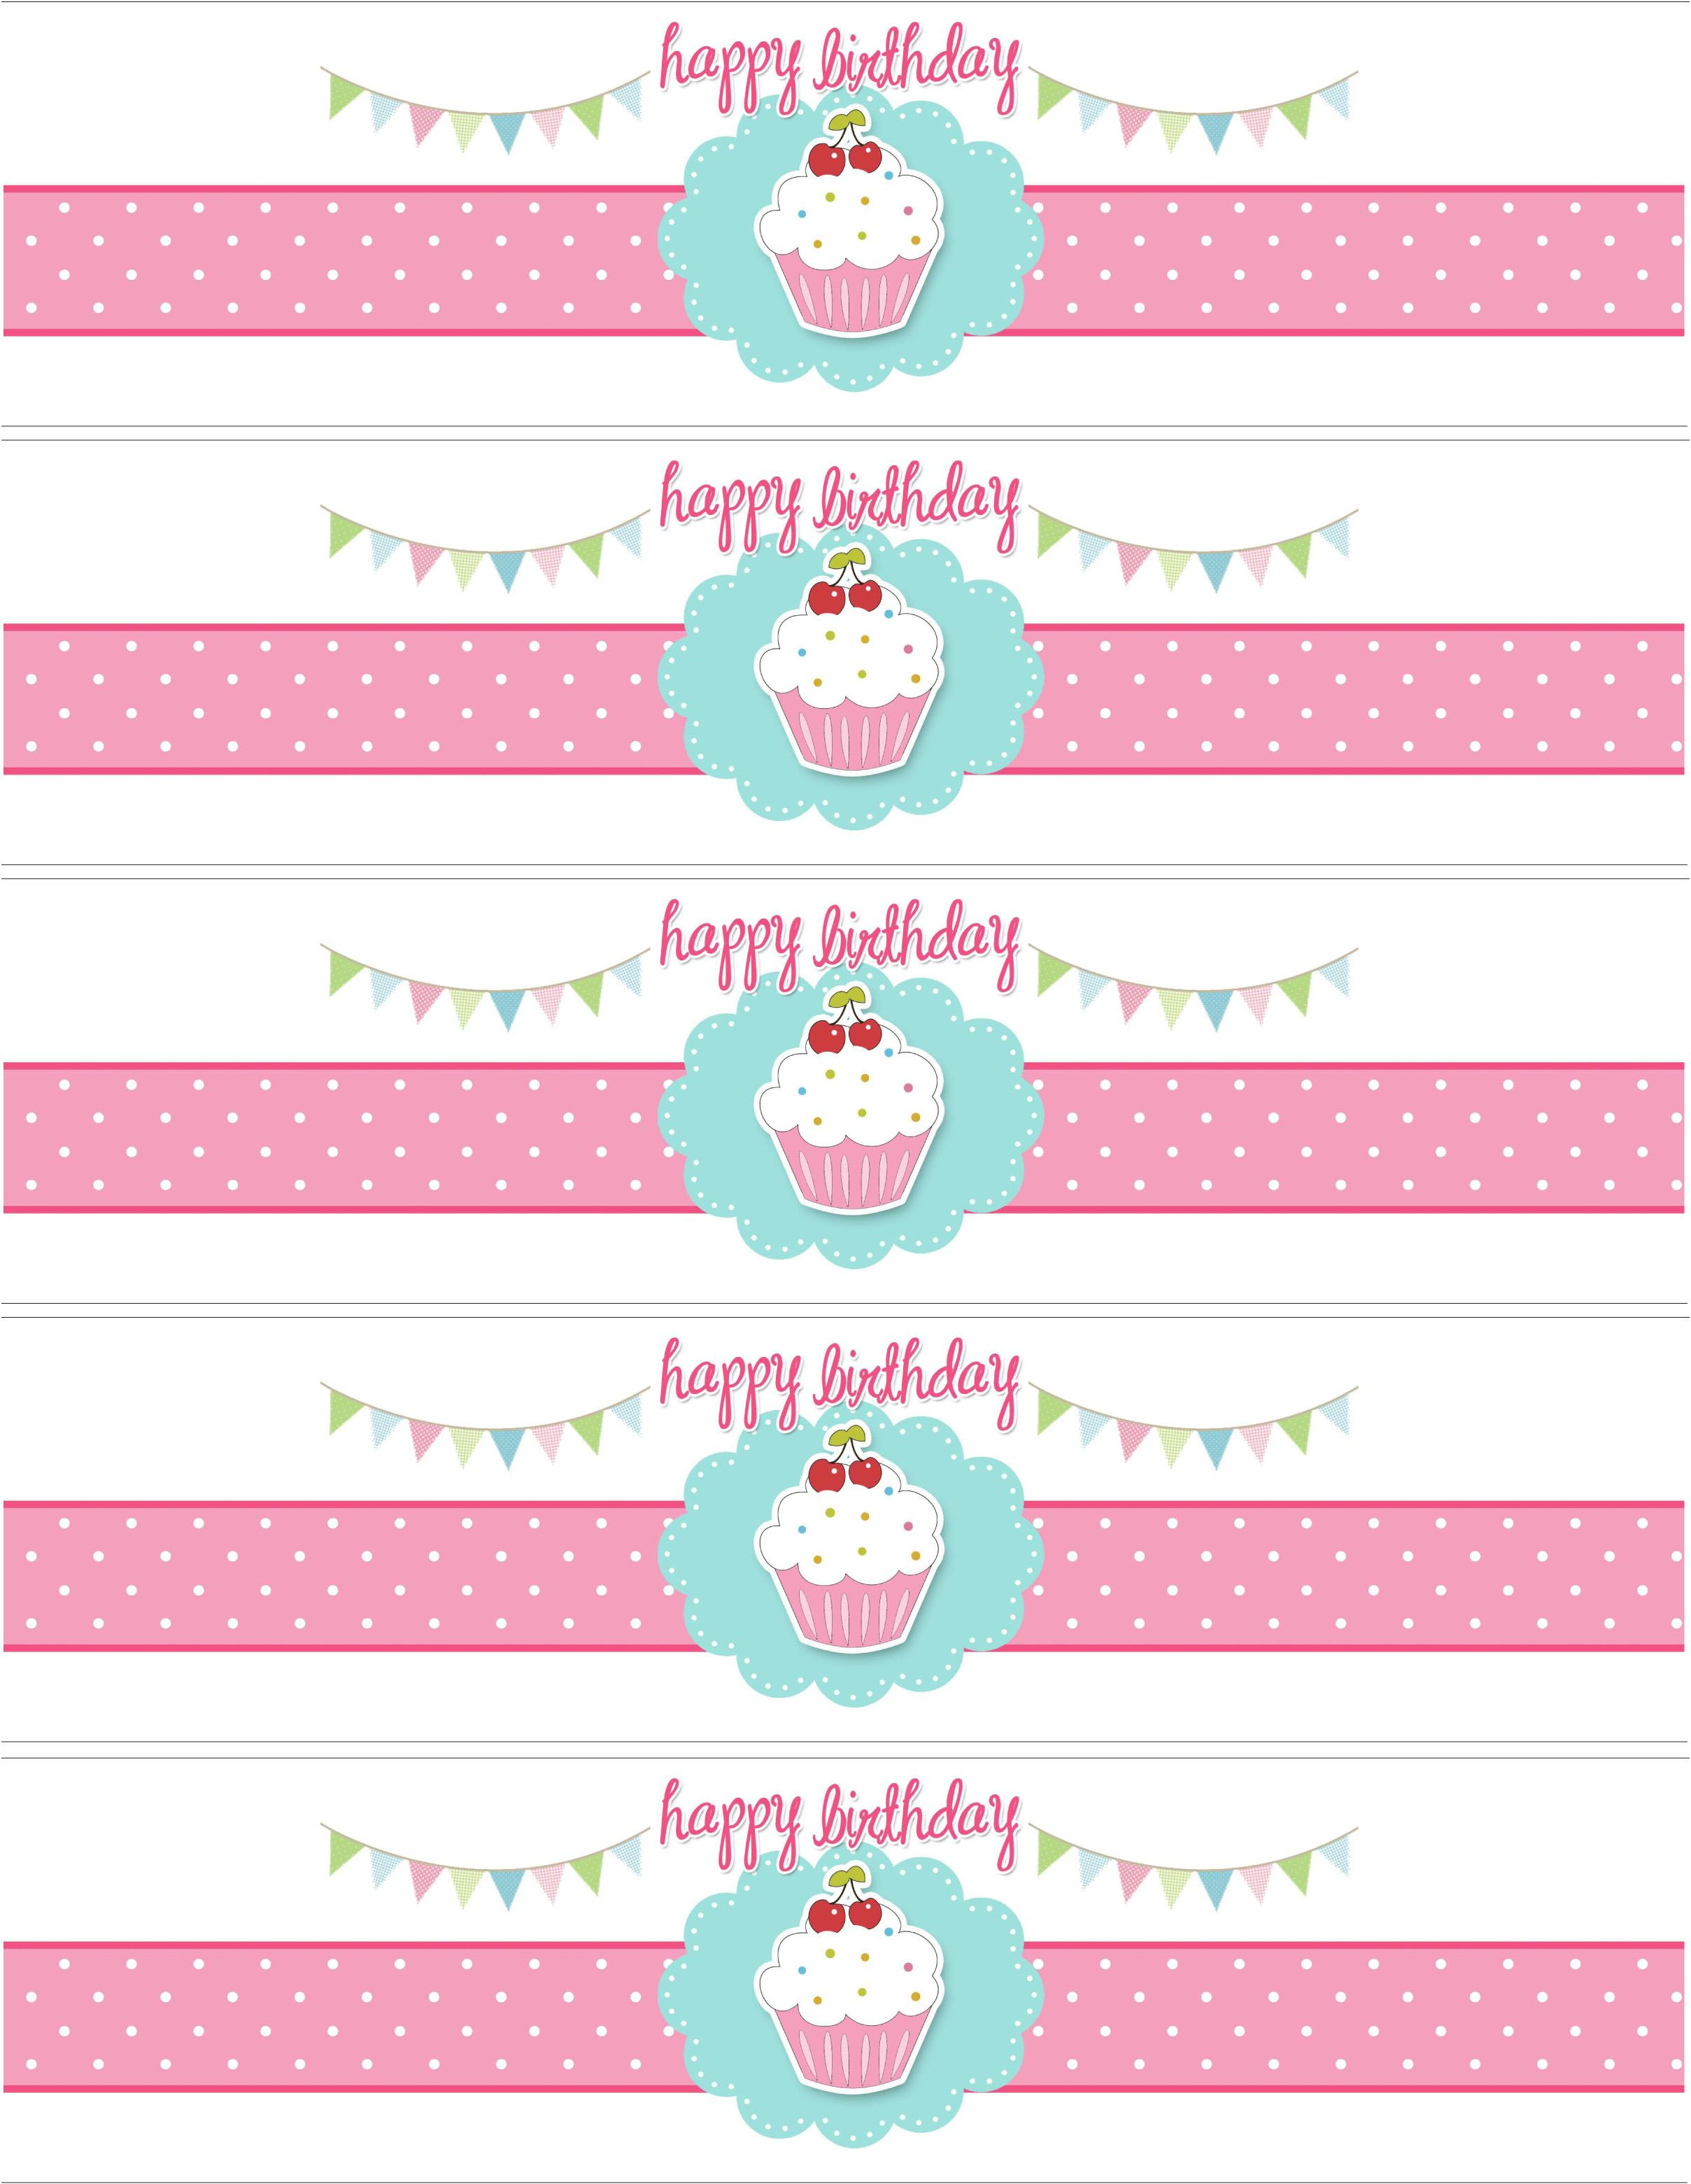 Cupcake Birthday Party With Free Printables | Diy Birthday Party - Free Printable Water Bottle Labels